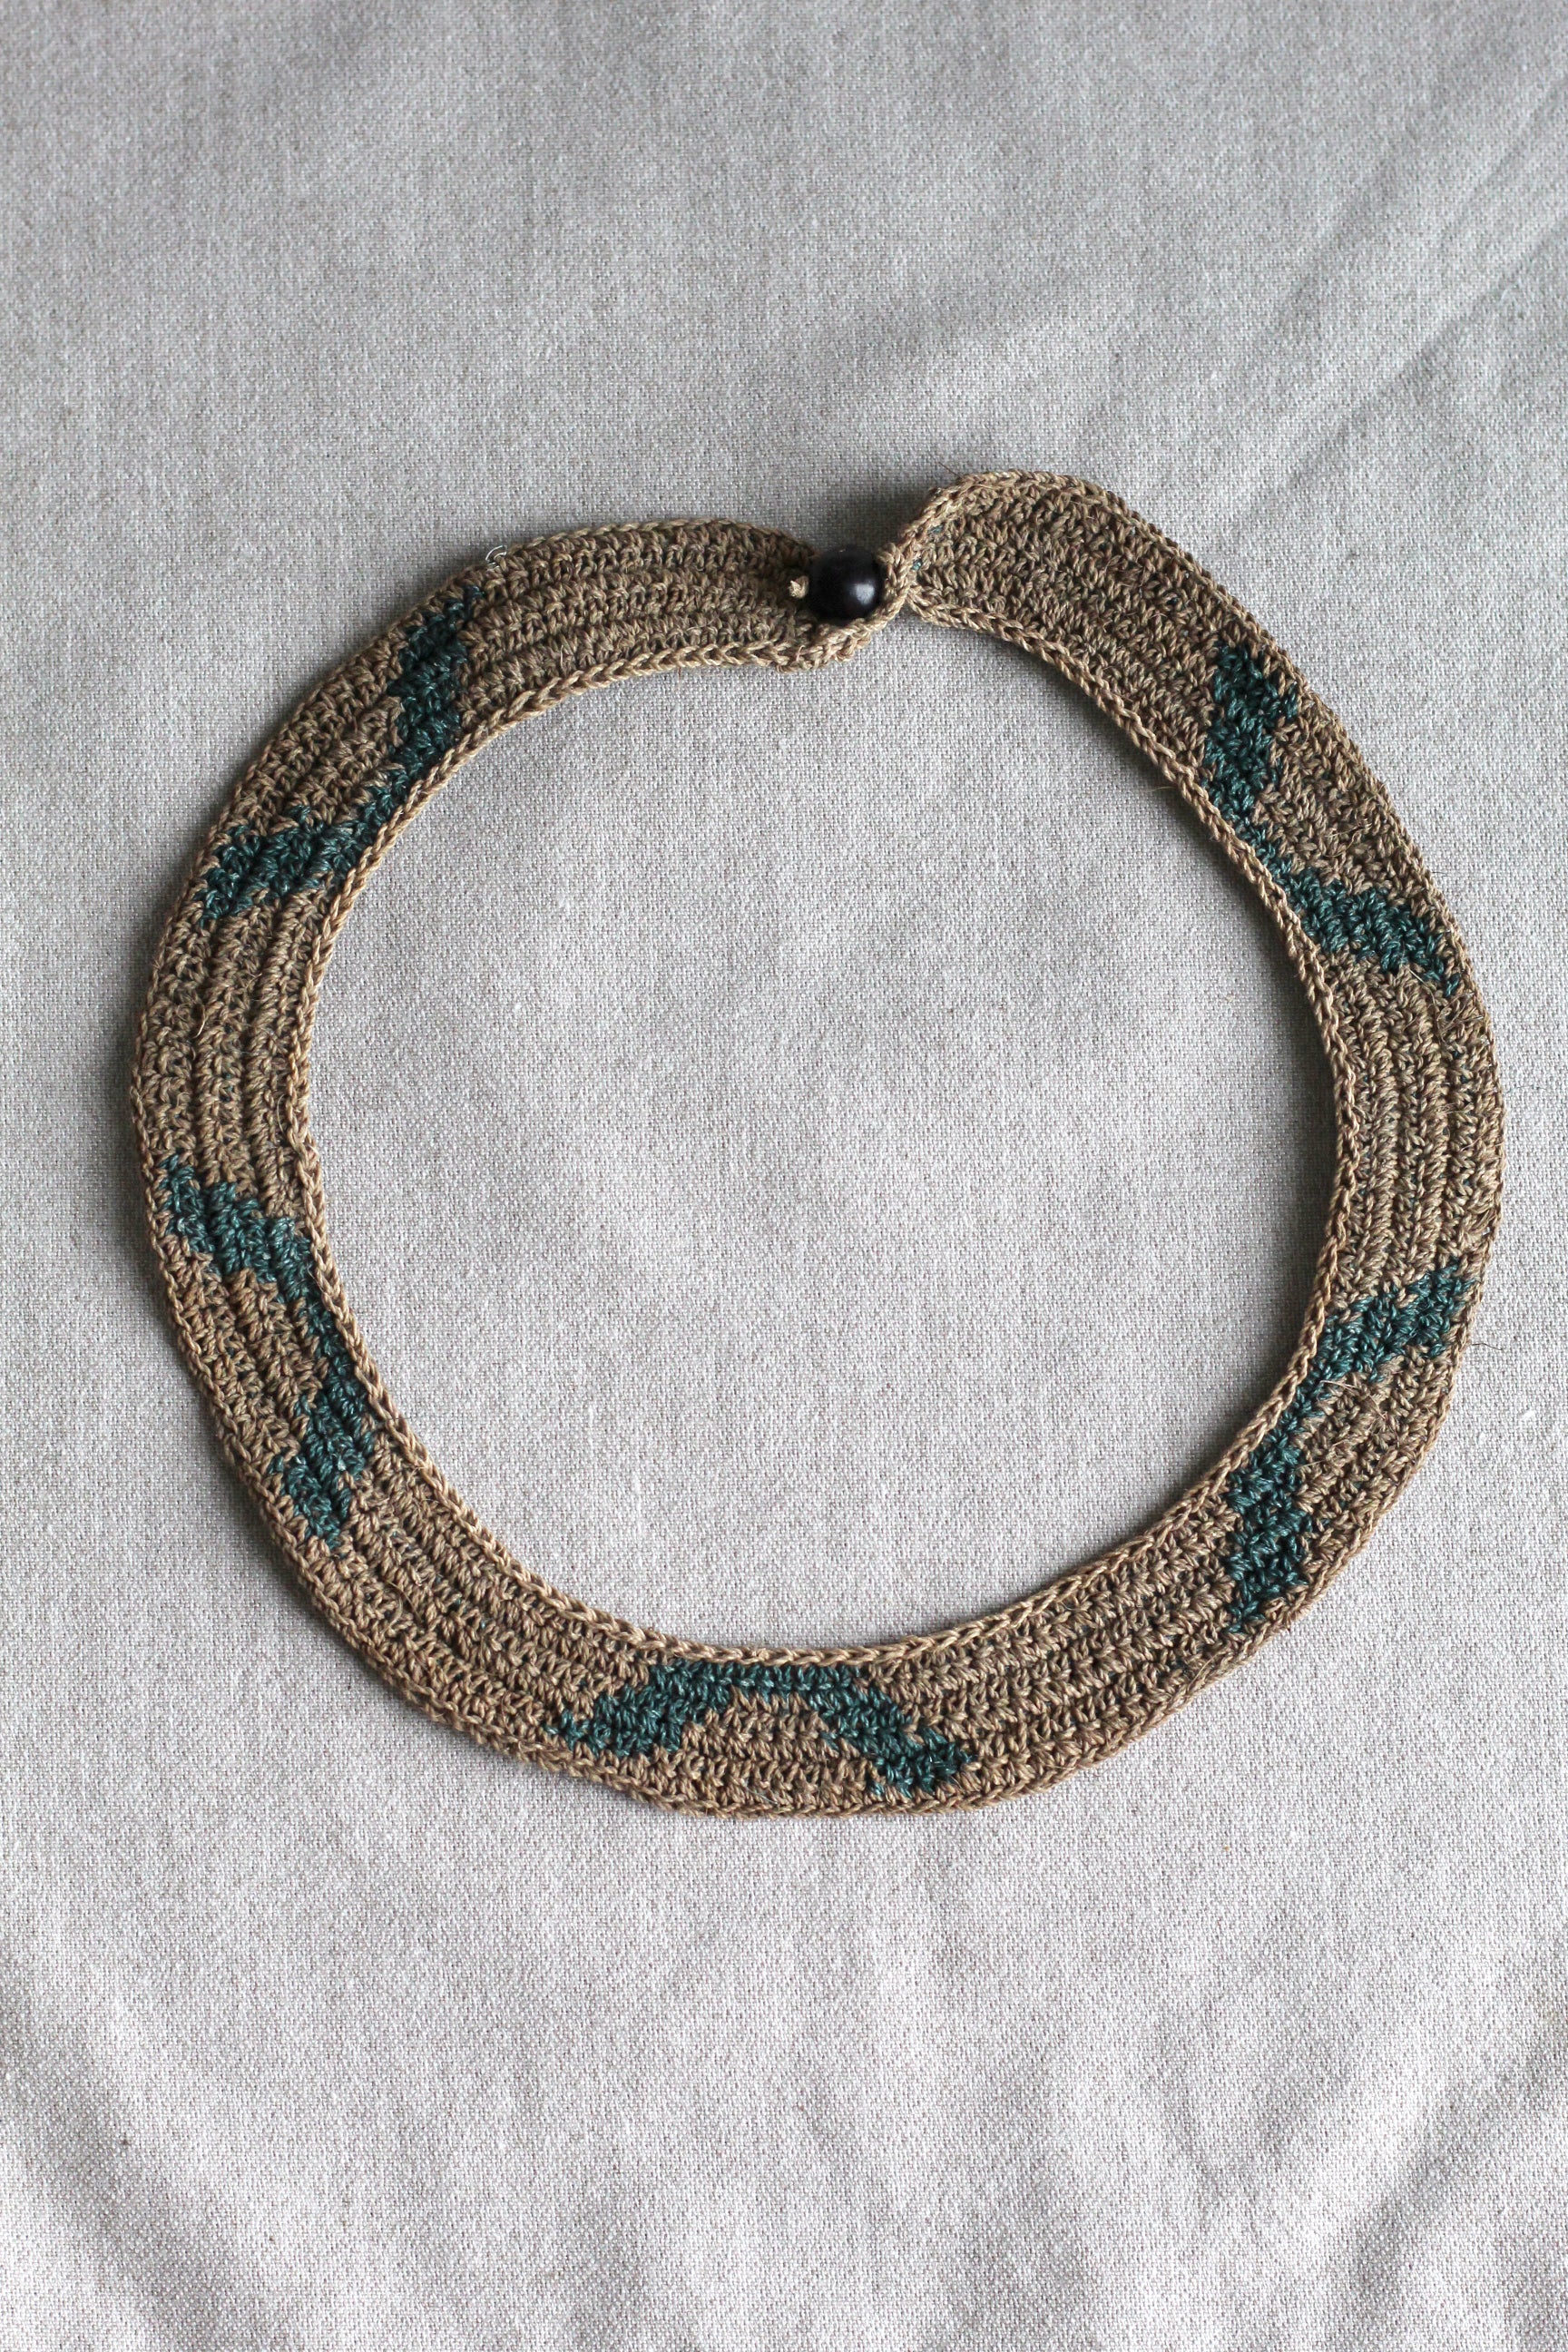 Necklace #0106 | Chocolate & Green